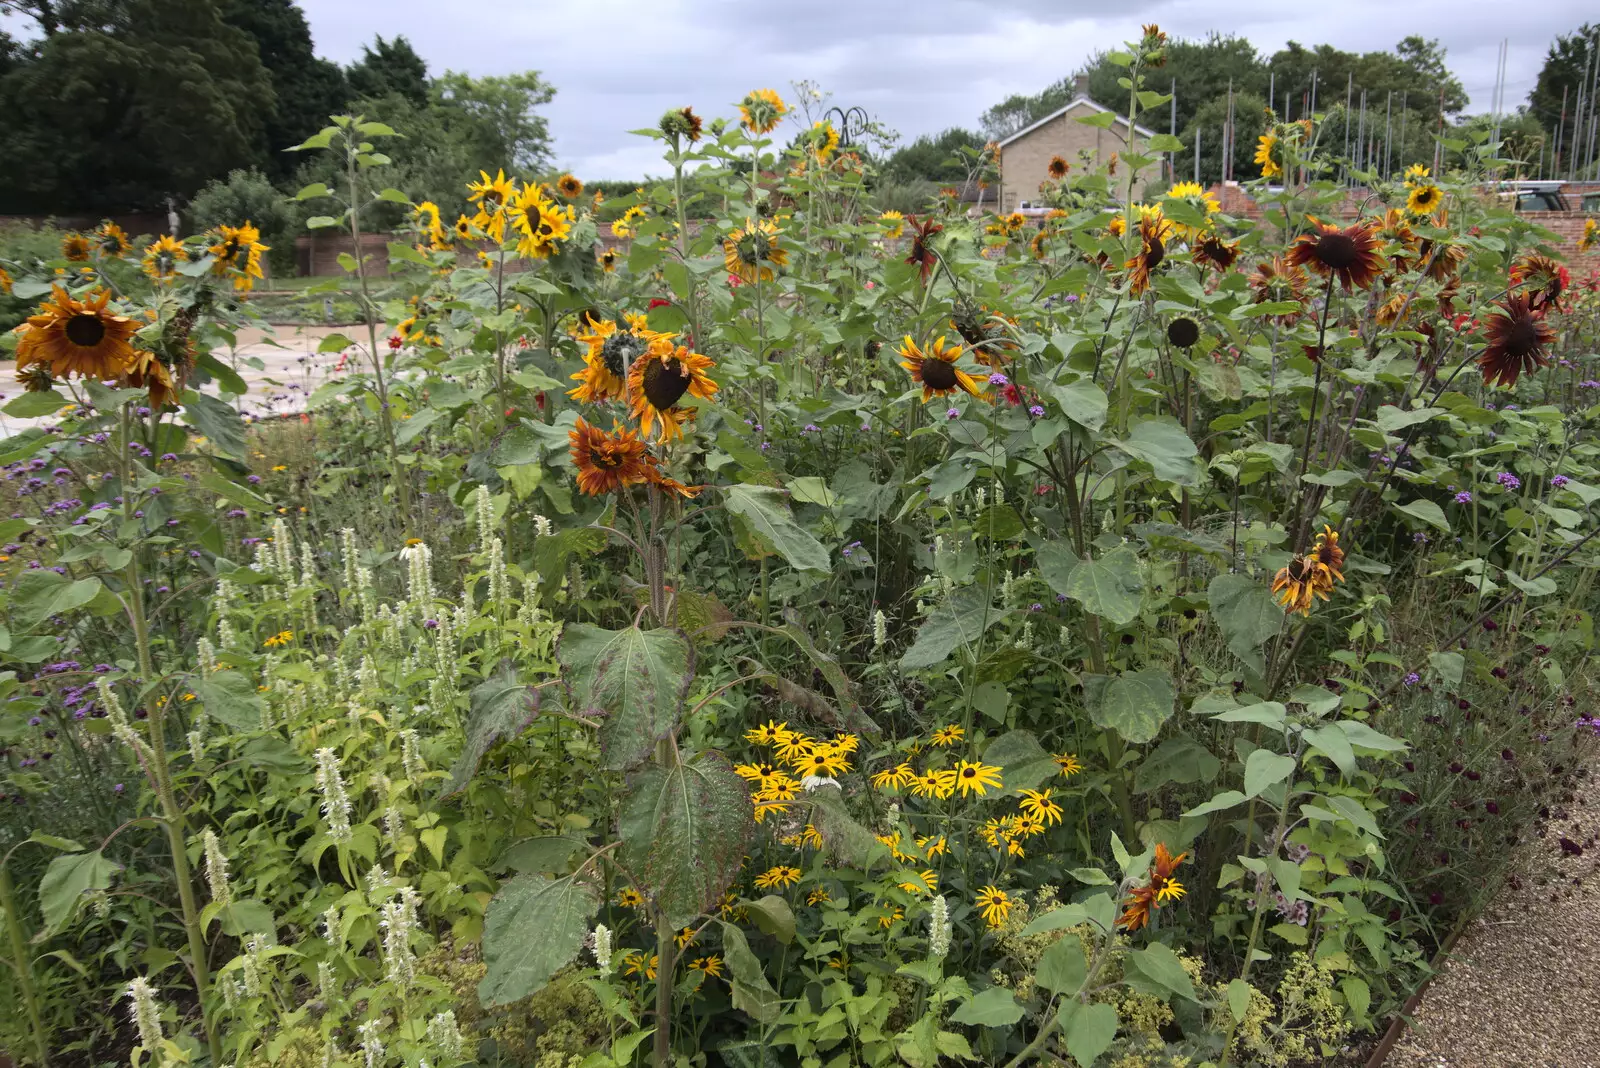 Sunflowers down at the Oaksmere, from Meg-fest, and Sean Visits, Bressingham and Brome, Suffolk - 1st August 2021